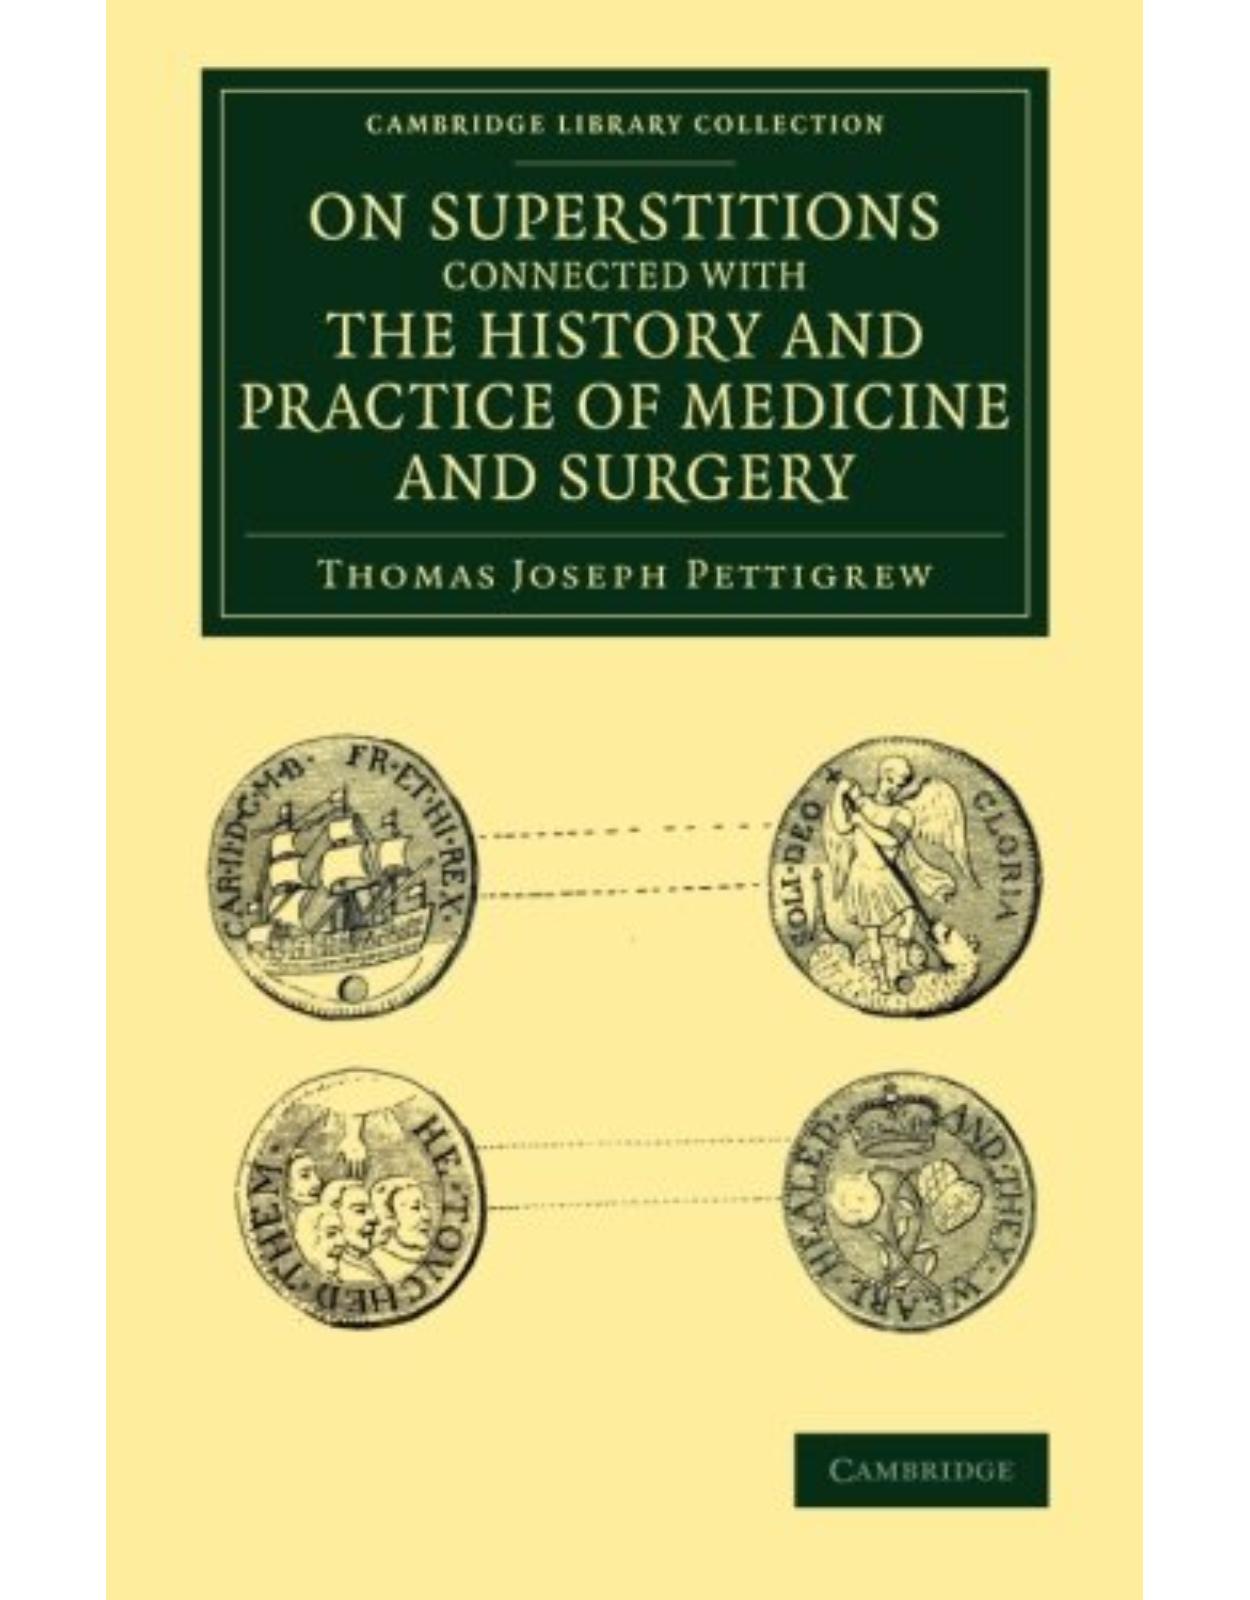 On Superstitions Connected with the History and Practice of Medicine and Surgery (Cambridge Library Collection - History of Medicine)